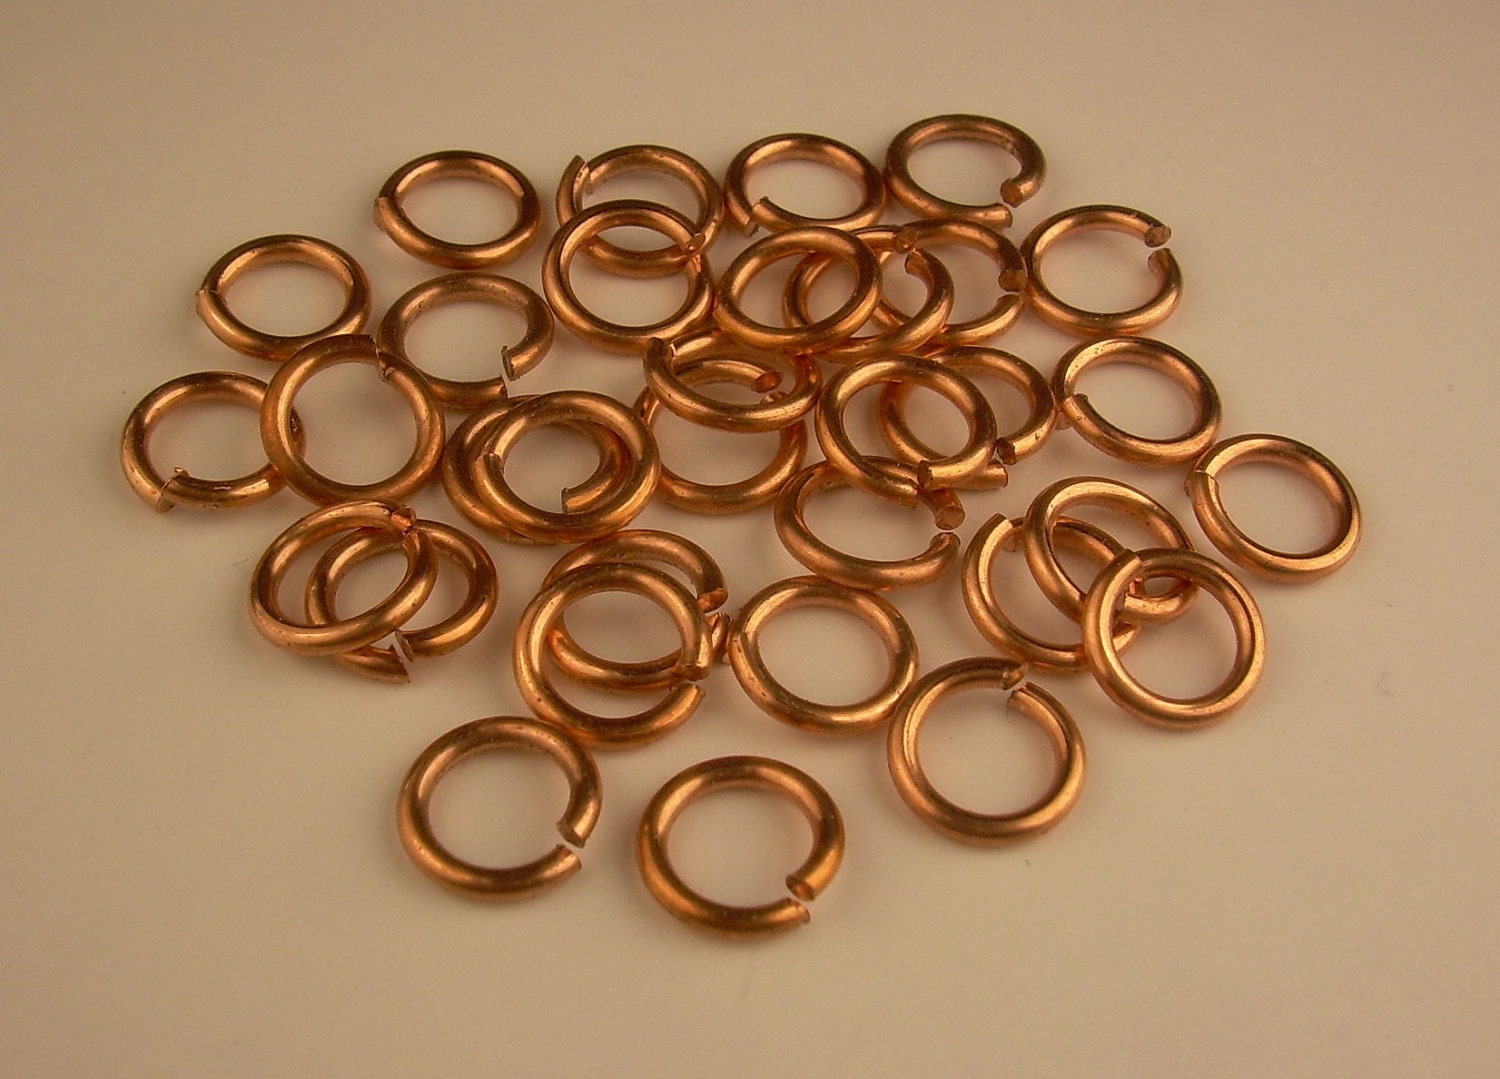 Mandala Crafts Small Jump Rings for Jewelry Making – Metal Jump Rings for Crafts – Jump Ring Jewelry O Rings Antique Copper Jump Ring Kit 4mm 5mm